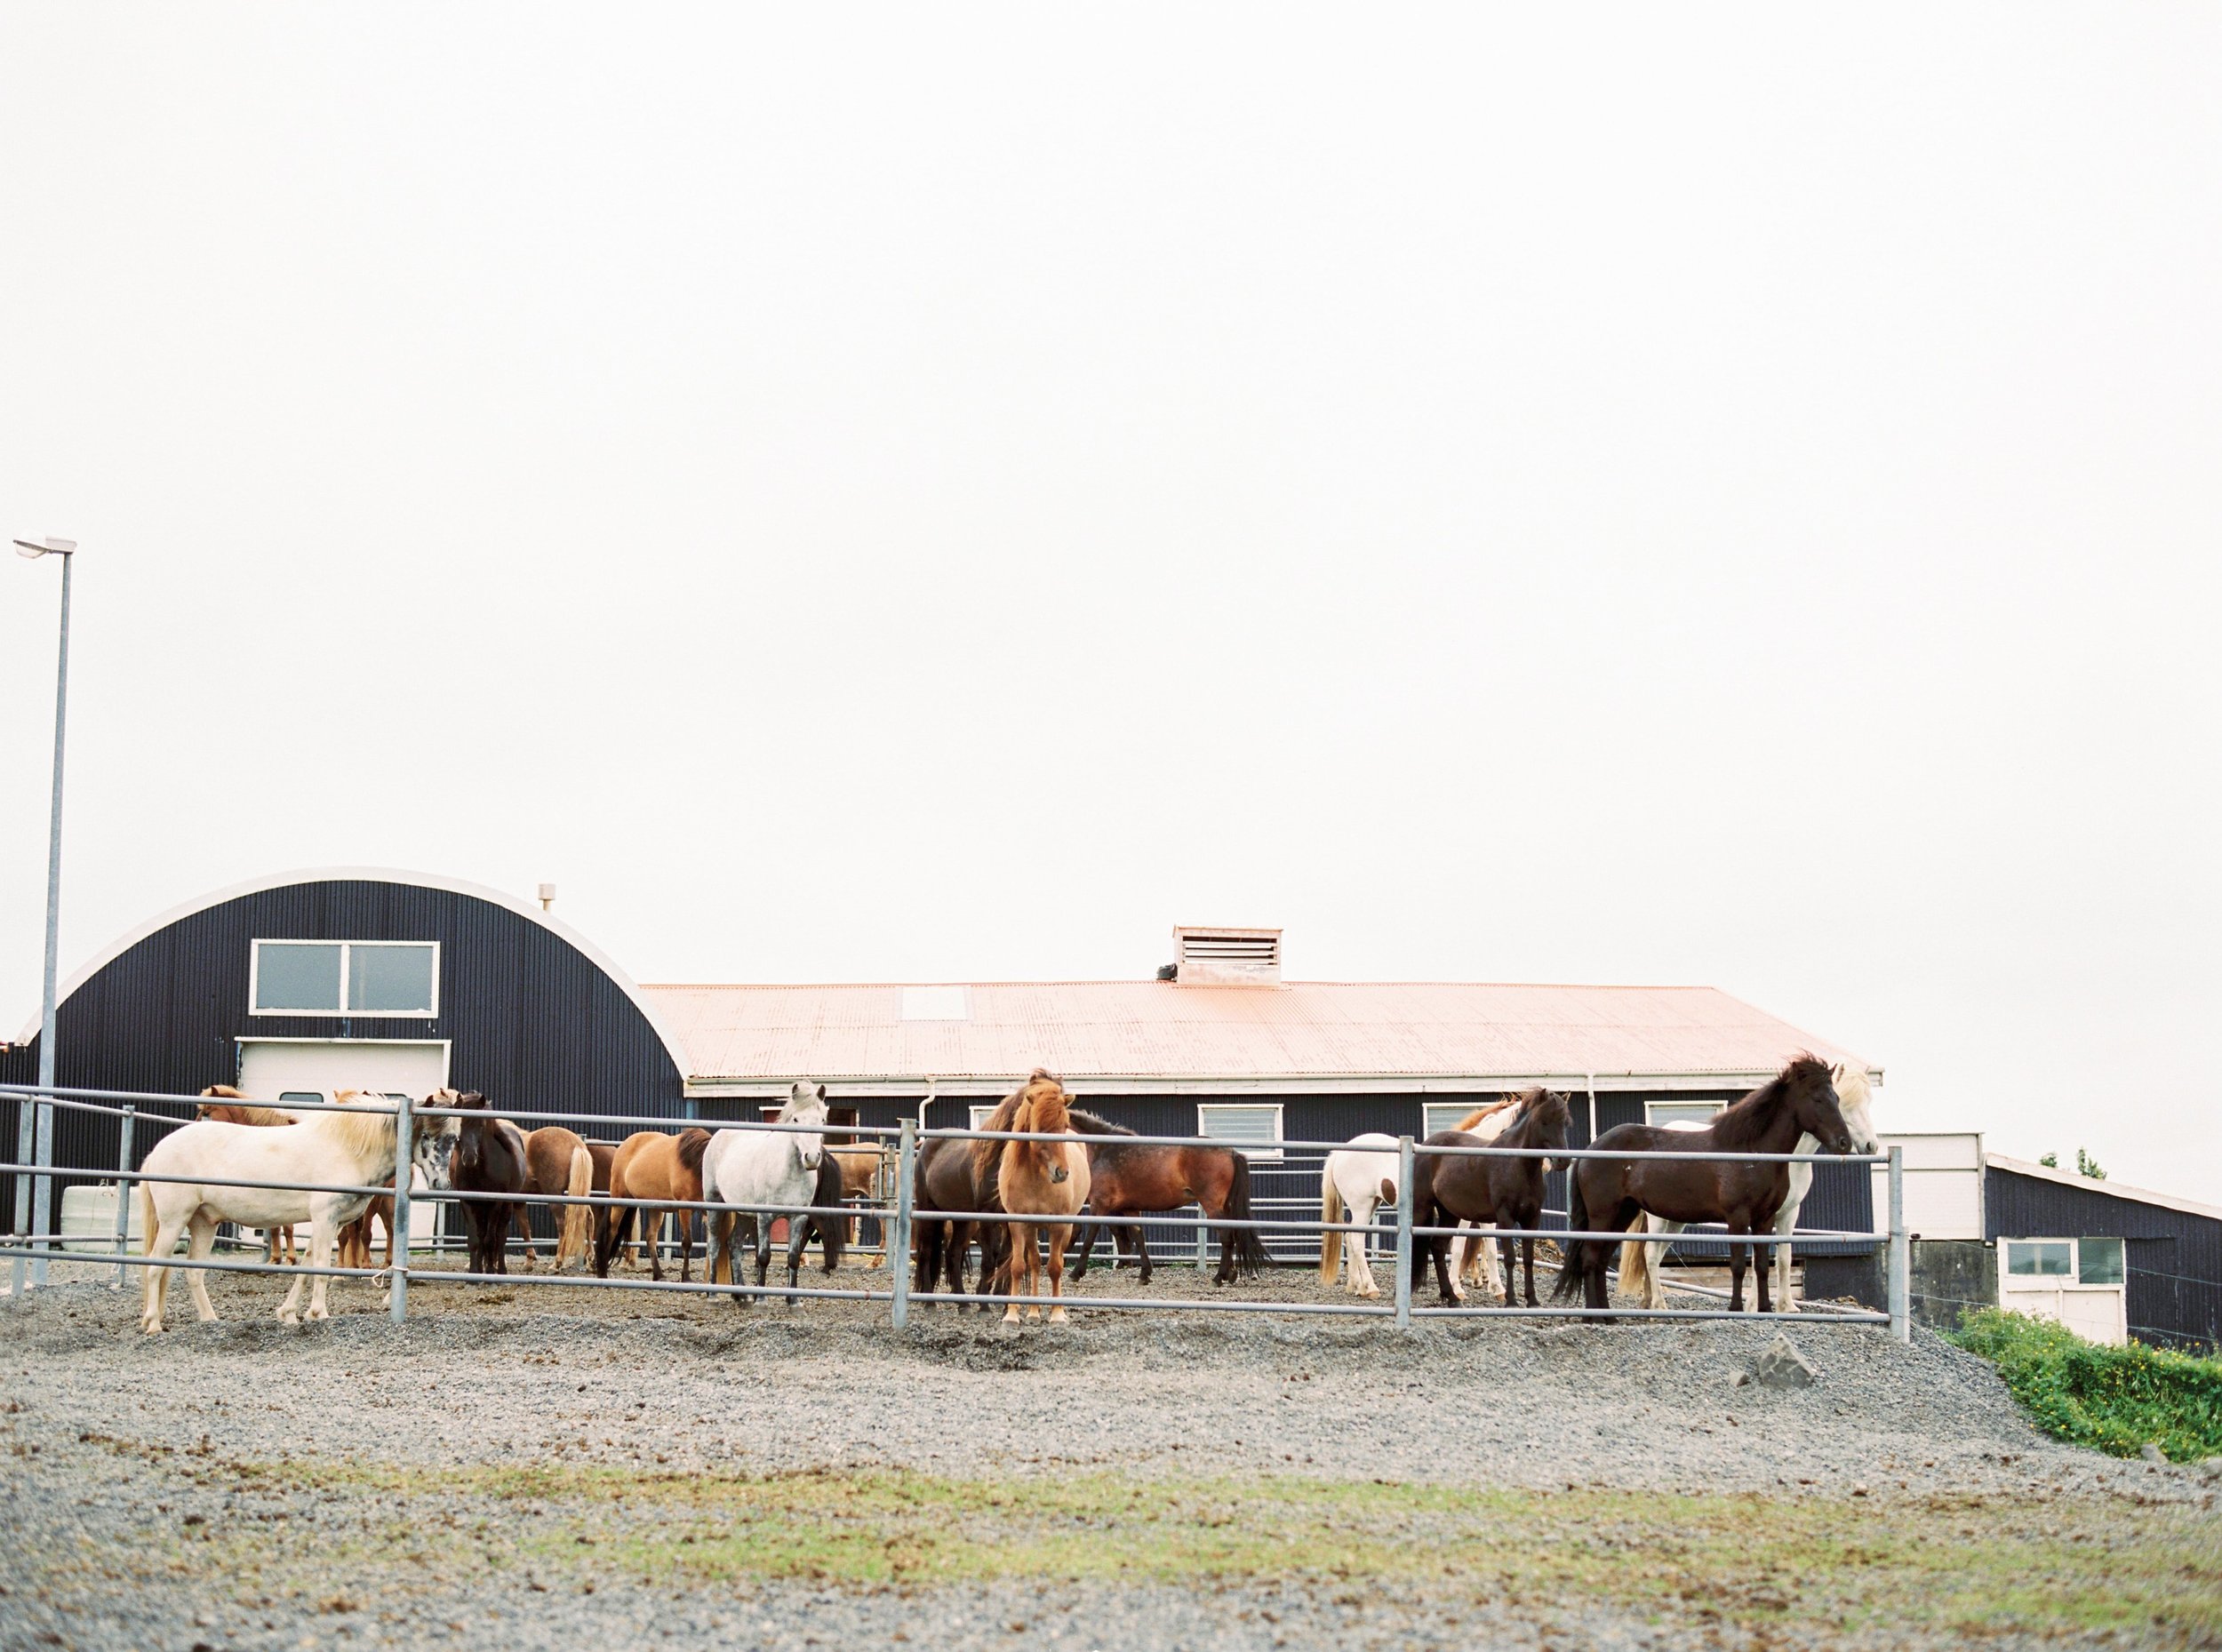 Horses in Iceland by Kristin Sweeting now on Cottage Hill51.jpg